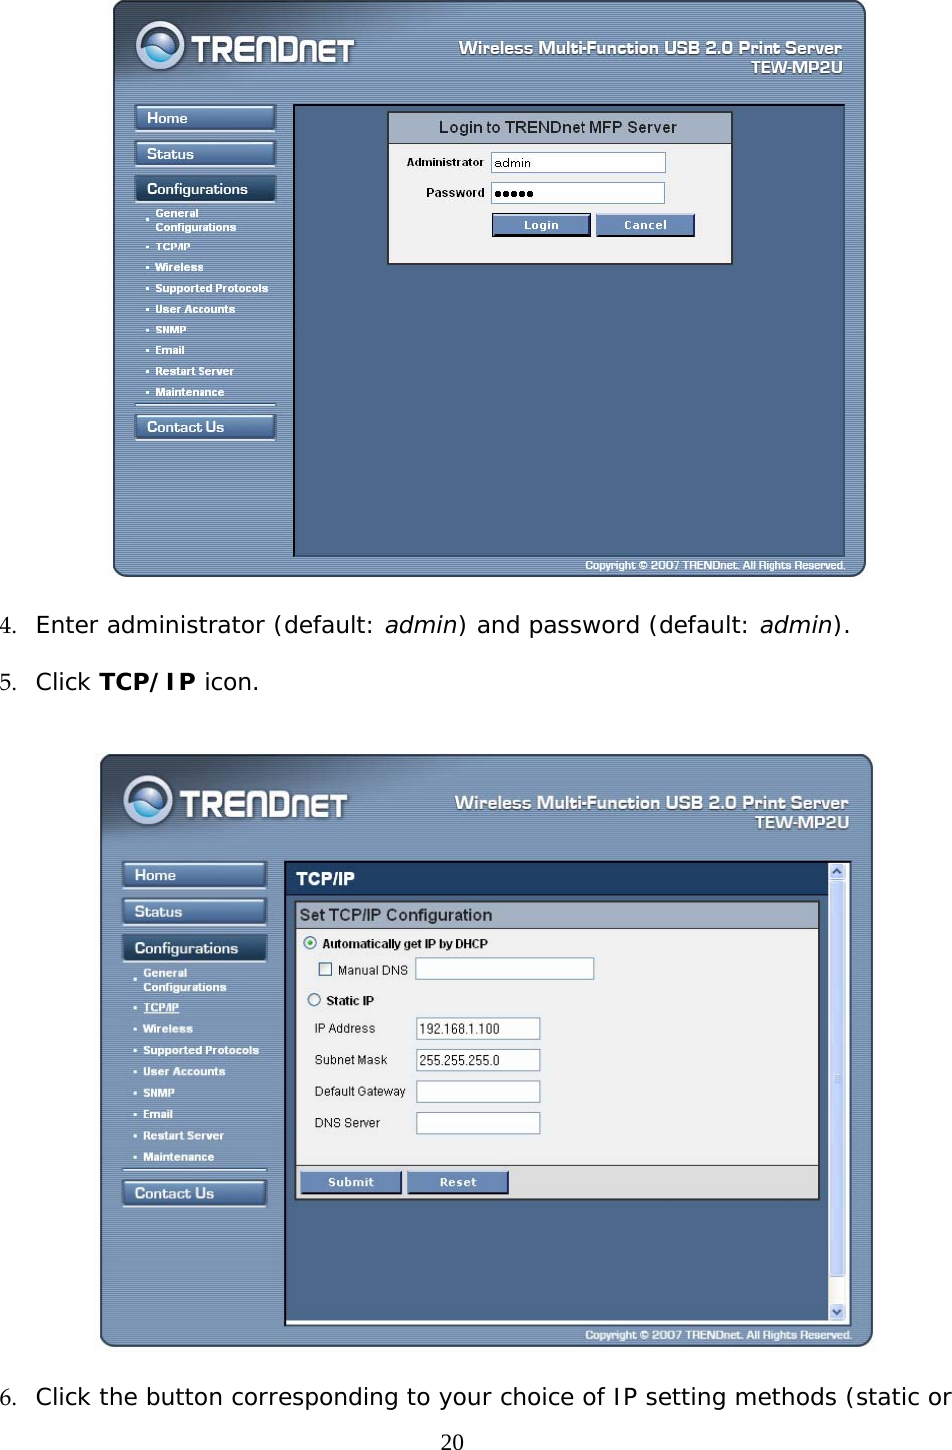     20  4. Enter administrator (default: admin) and password (default: admin).   5. Click TCP/IP icon.     6. Click the button corresponding to your choice of IP setting methods (static or 